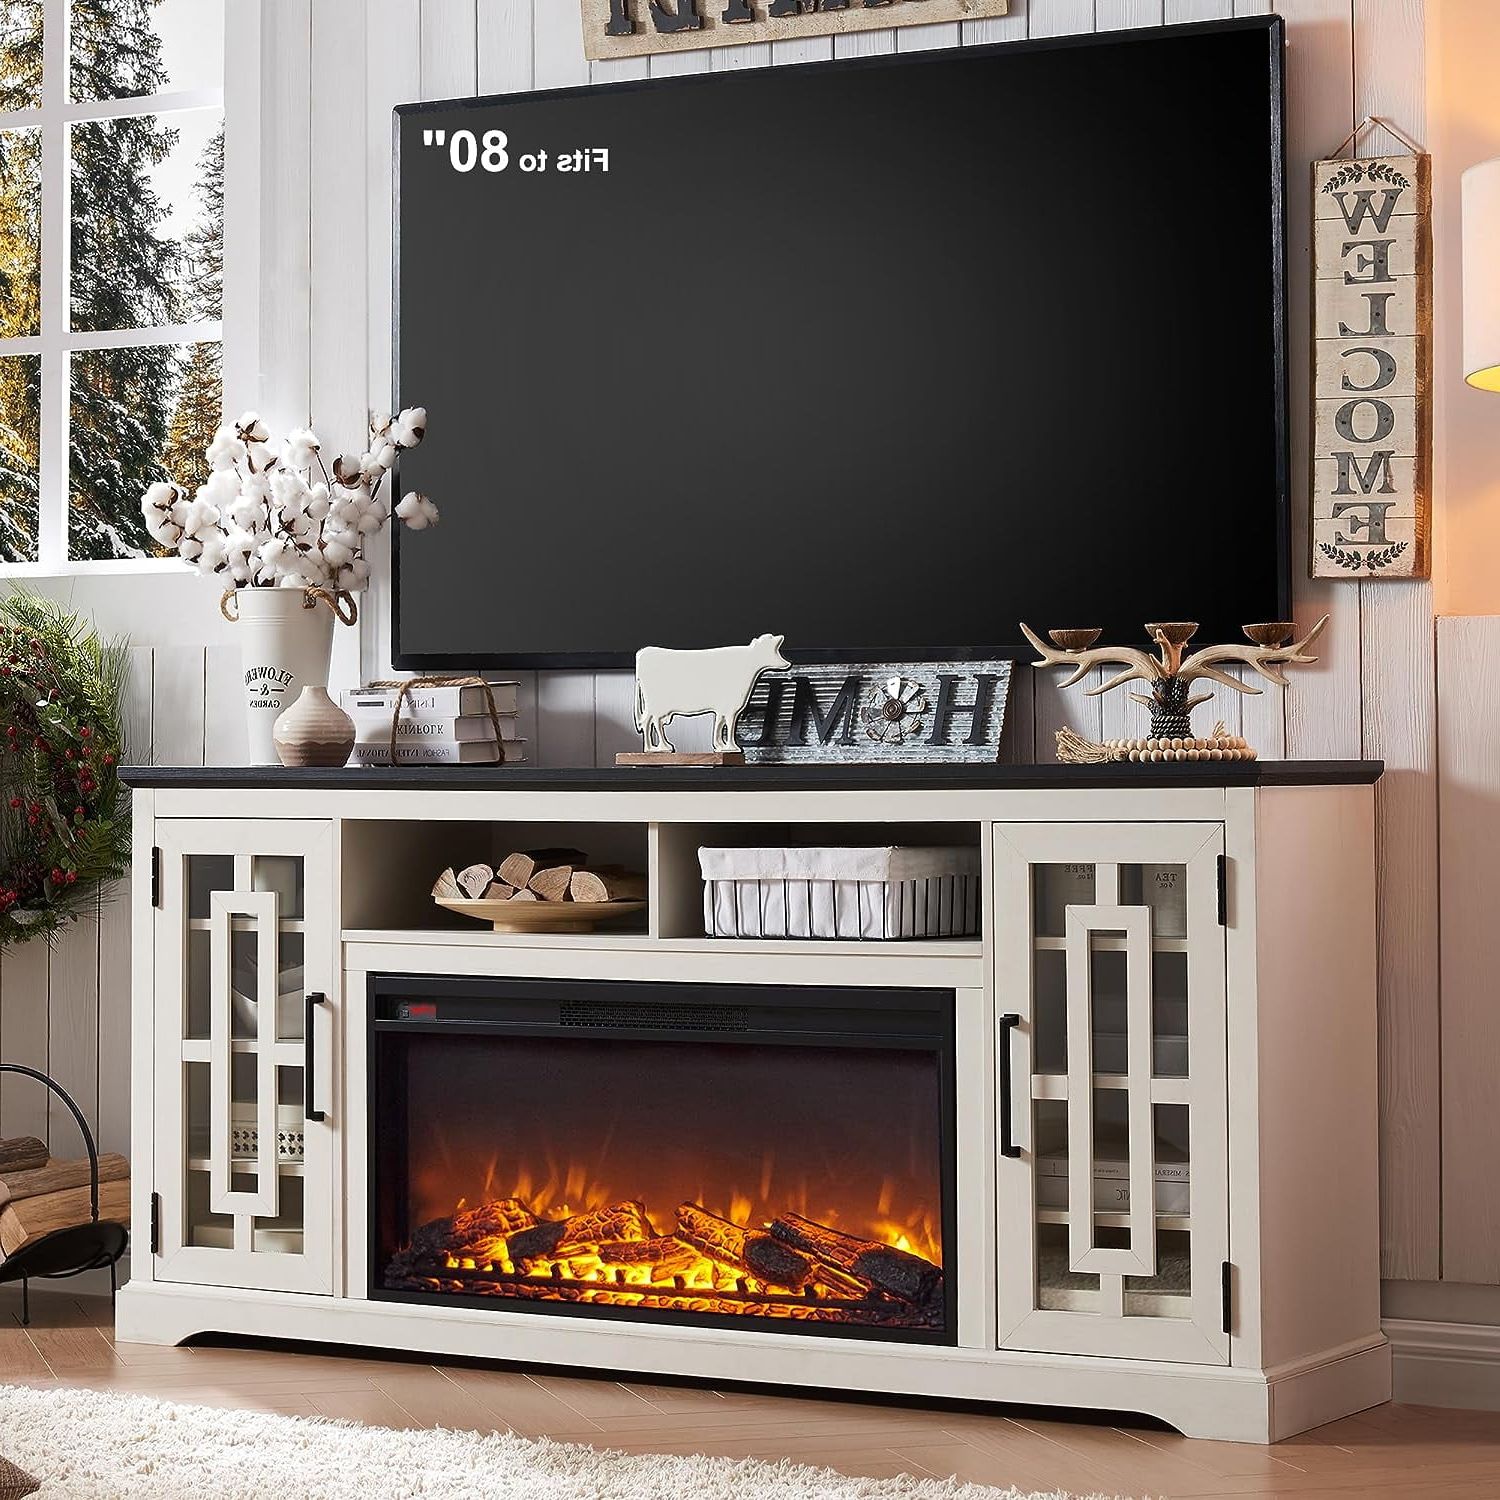 T4tream 70" Fireplace Tv Stand For 75 80 Inch Tv, Farmhouse Highboy  Entertainment Center With Storage For Living Room, White – Walmart Inside Wood Highboy Fireplace Tv Stands (Gallery 3 of 20)